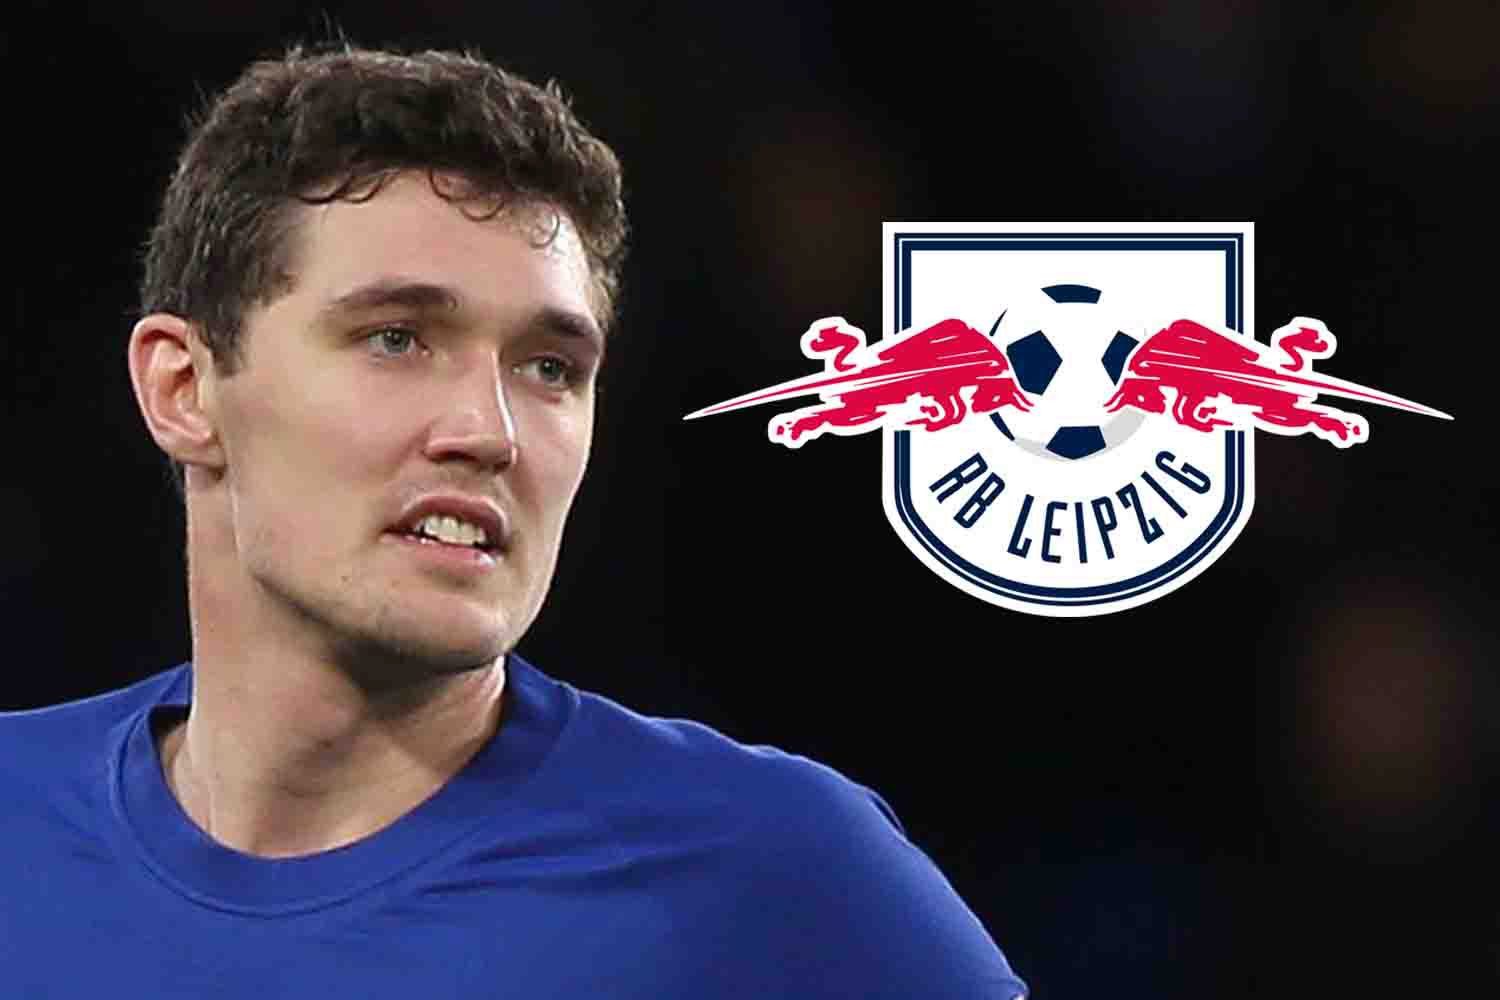 , RB Leipzig line up 25m transfer bid for Chelsea defender Christensen which may then trigger Akes return to Blues